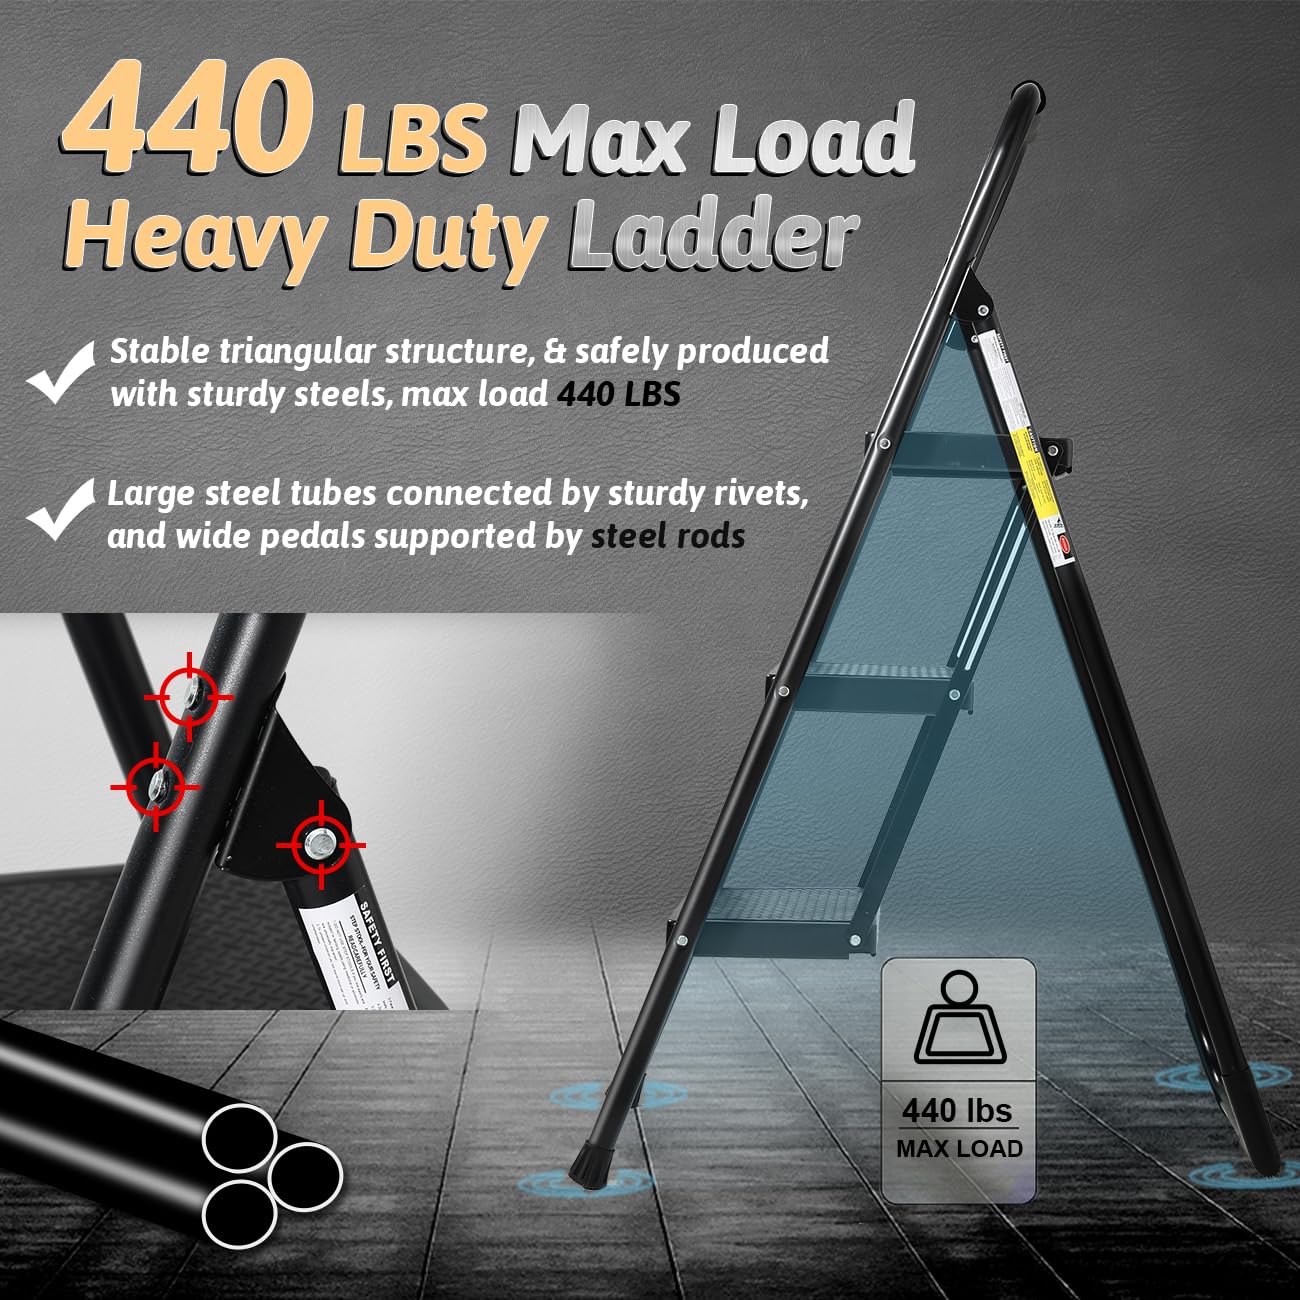 Double Elite Step Ladder 3 Step Folding with Handgrip, Heavy Duty 440Lbs Load Step Stools for Adults, Safer Step Ladder for Home/Kitchen, Small Foldable Step Stool with Anti-Slip Wide Pedals, Black